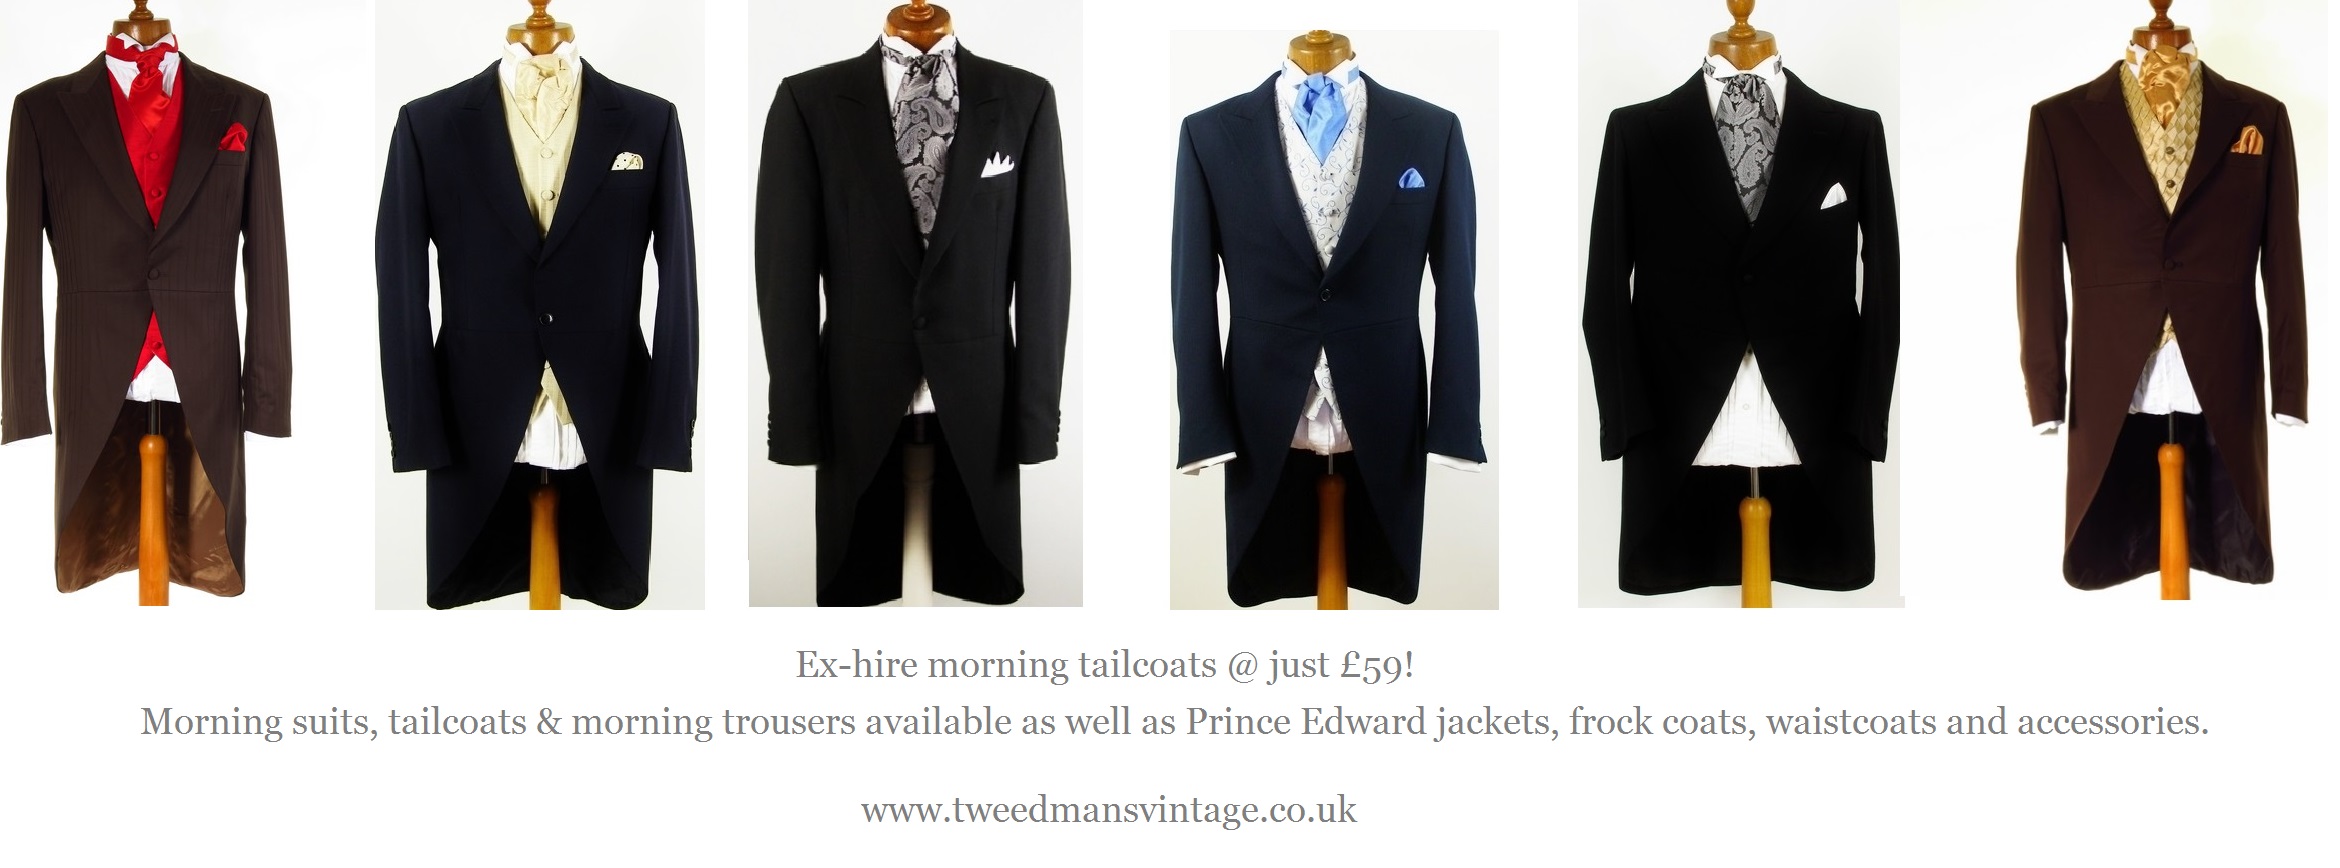 Ex-hire morning suits, tailcoats & morning trousers.